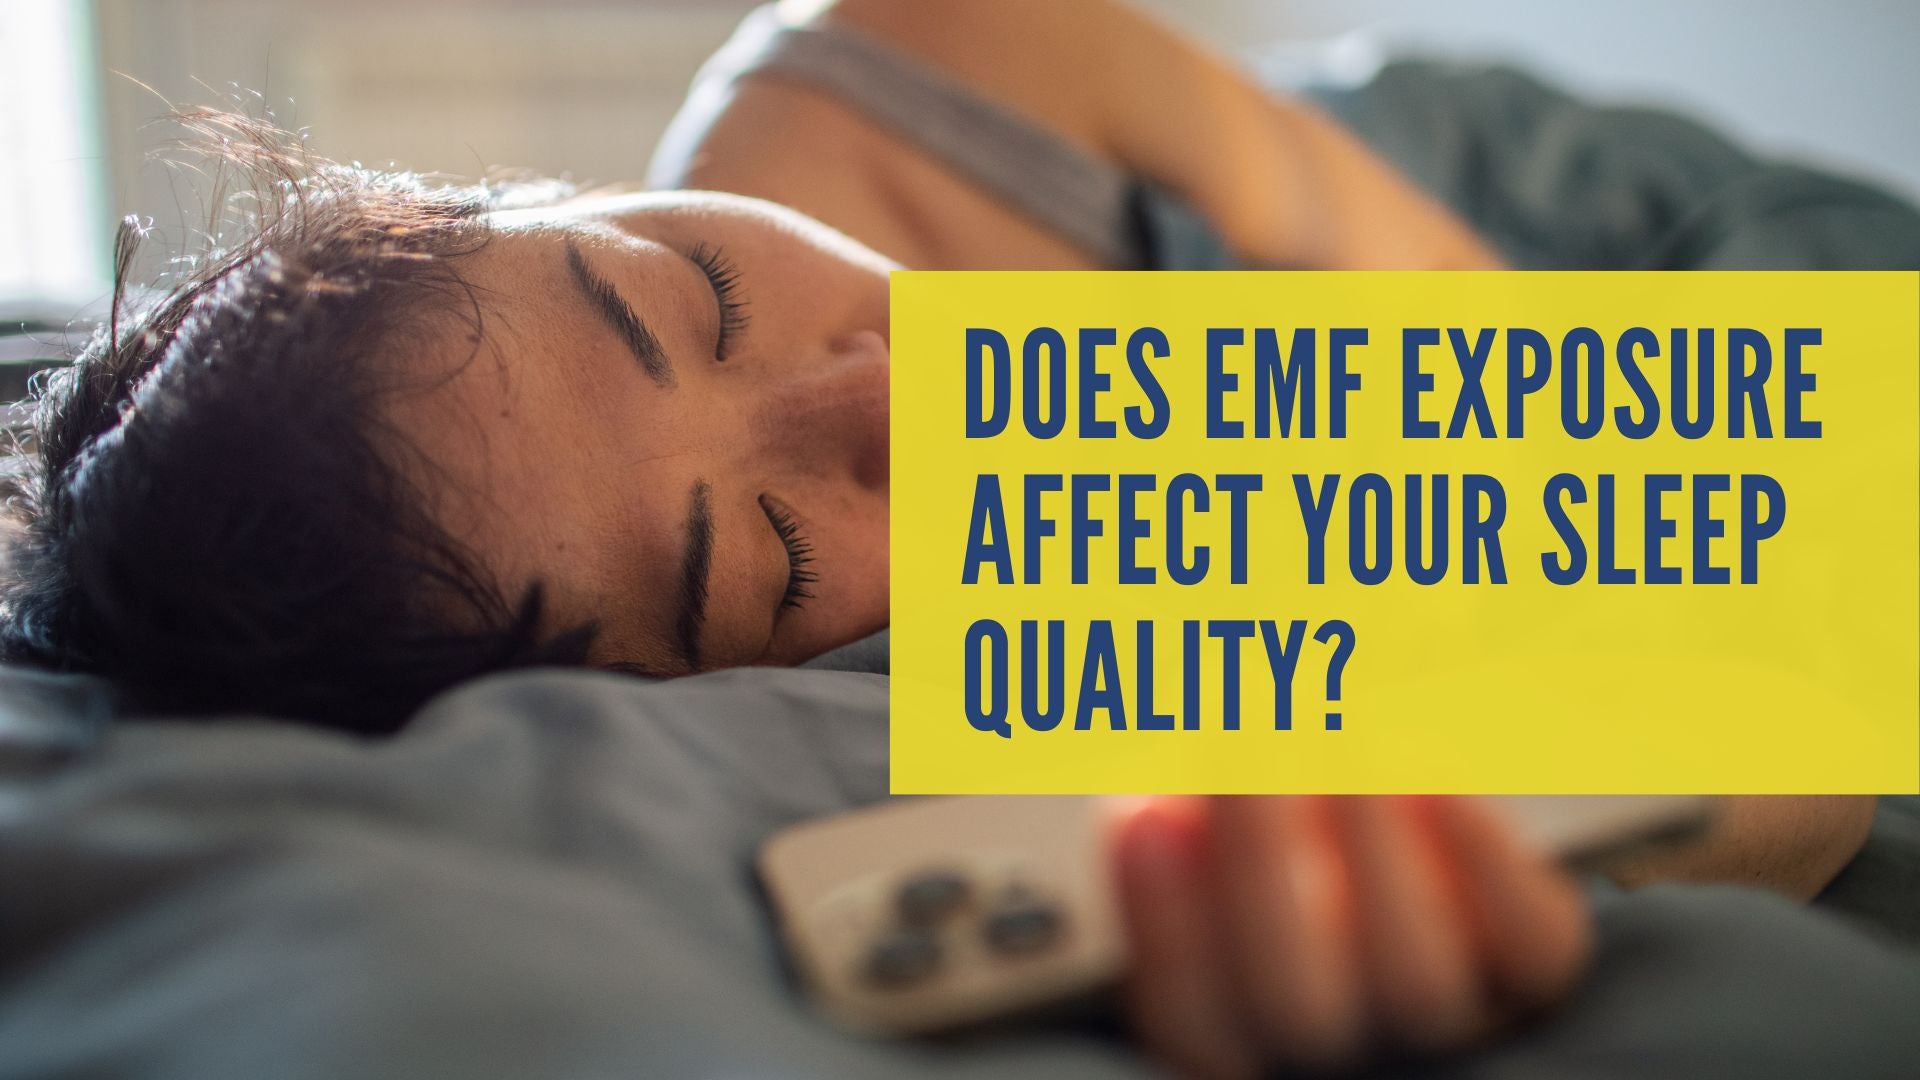 Does EMF Exposure Affect Your Sleep Quality?